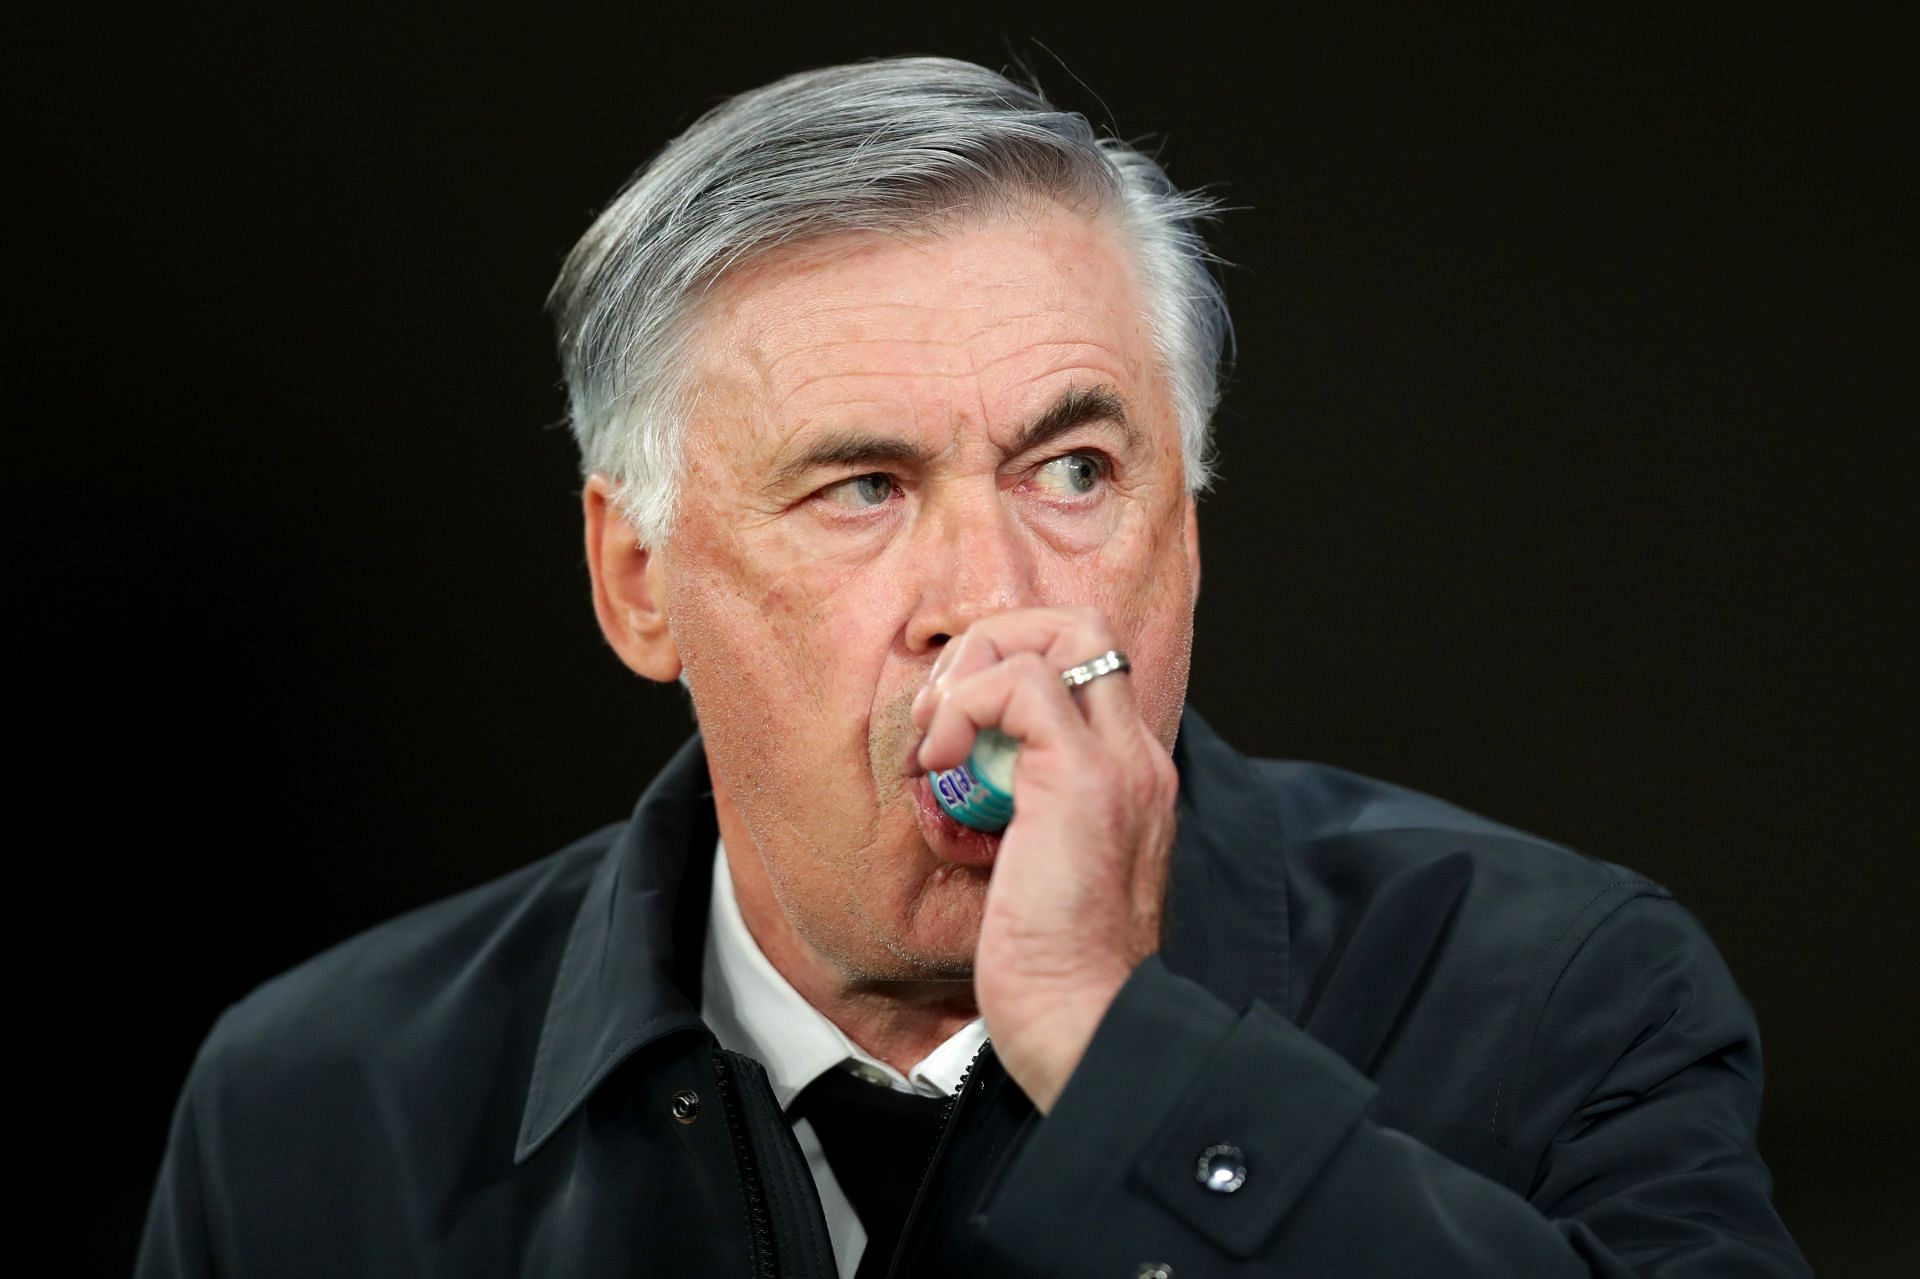 Carlo Ancelotti could be in the Manchester United dugout next season.